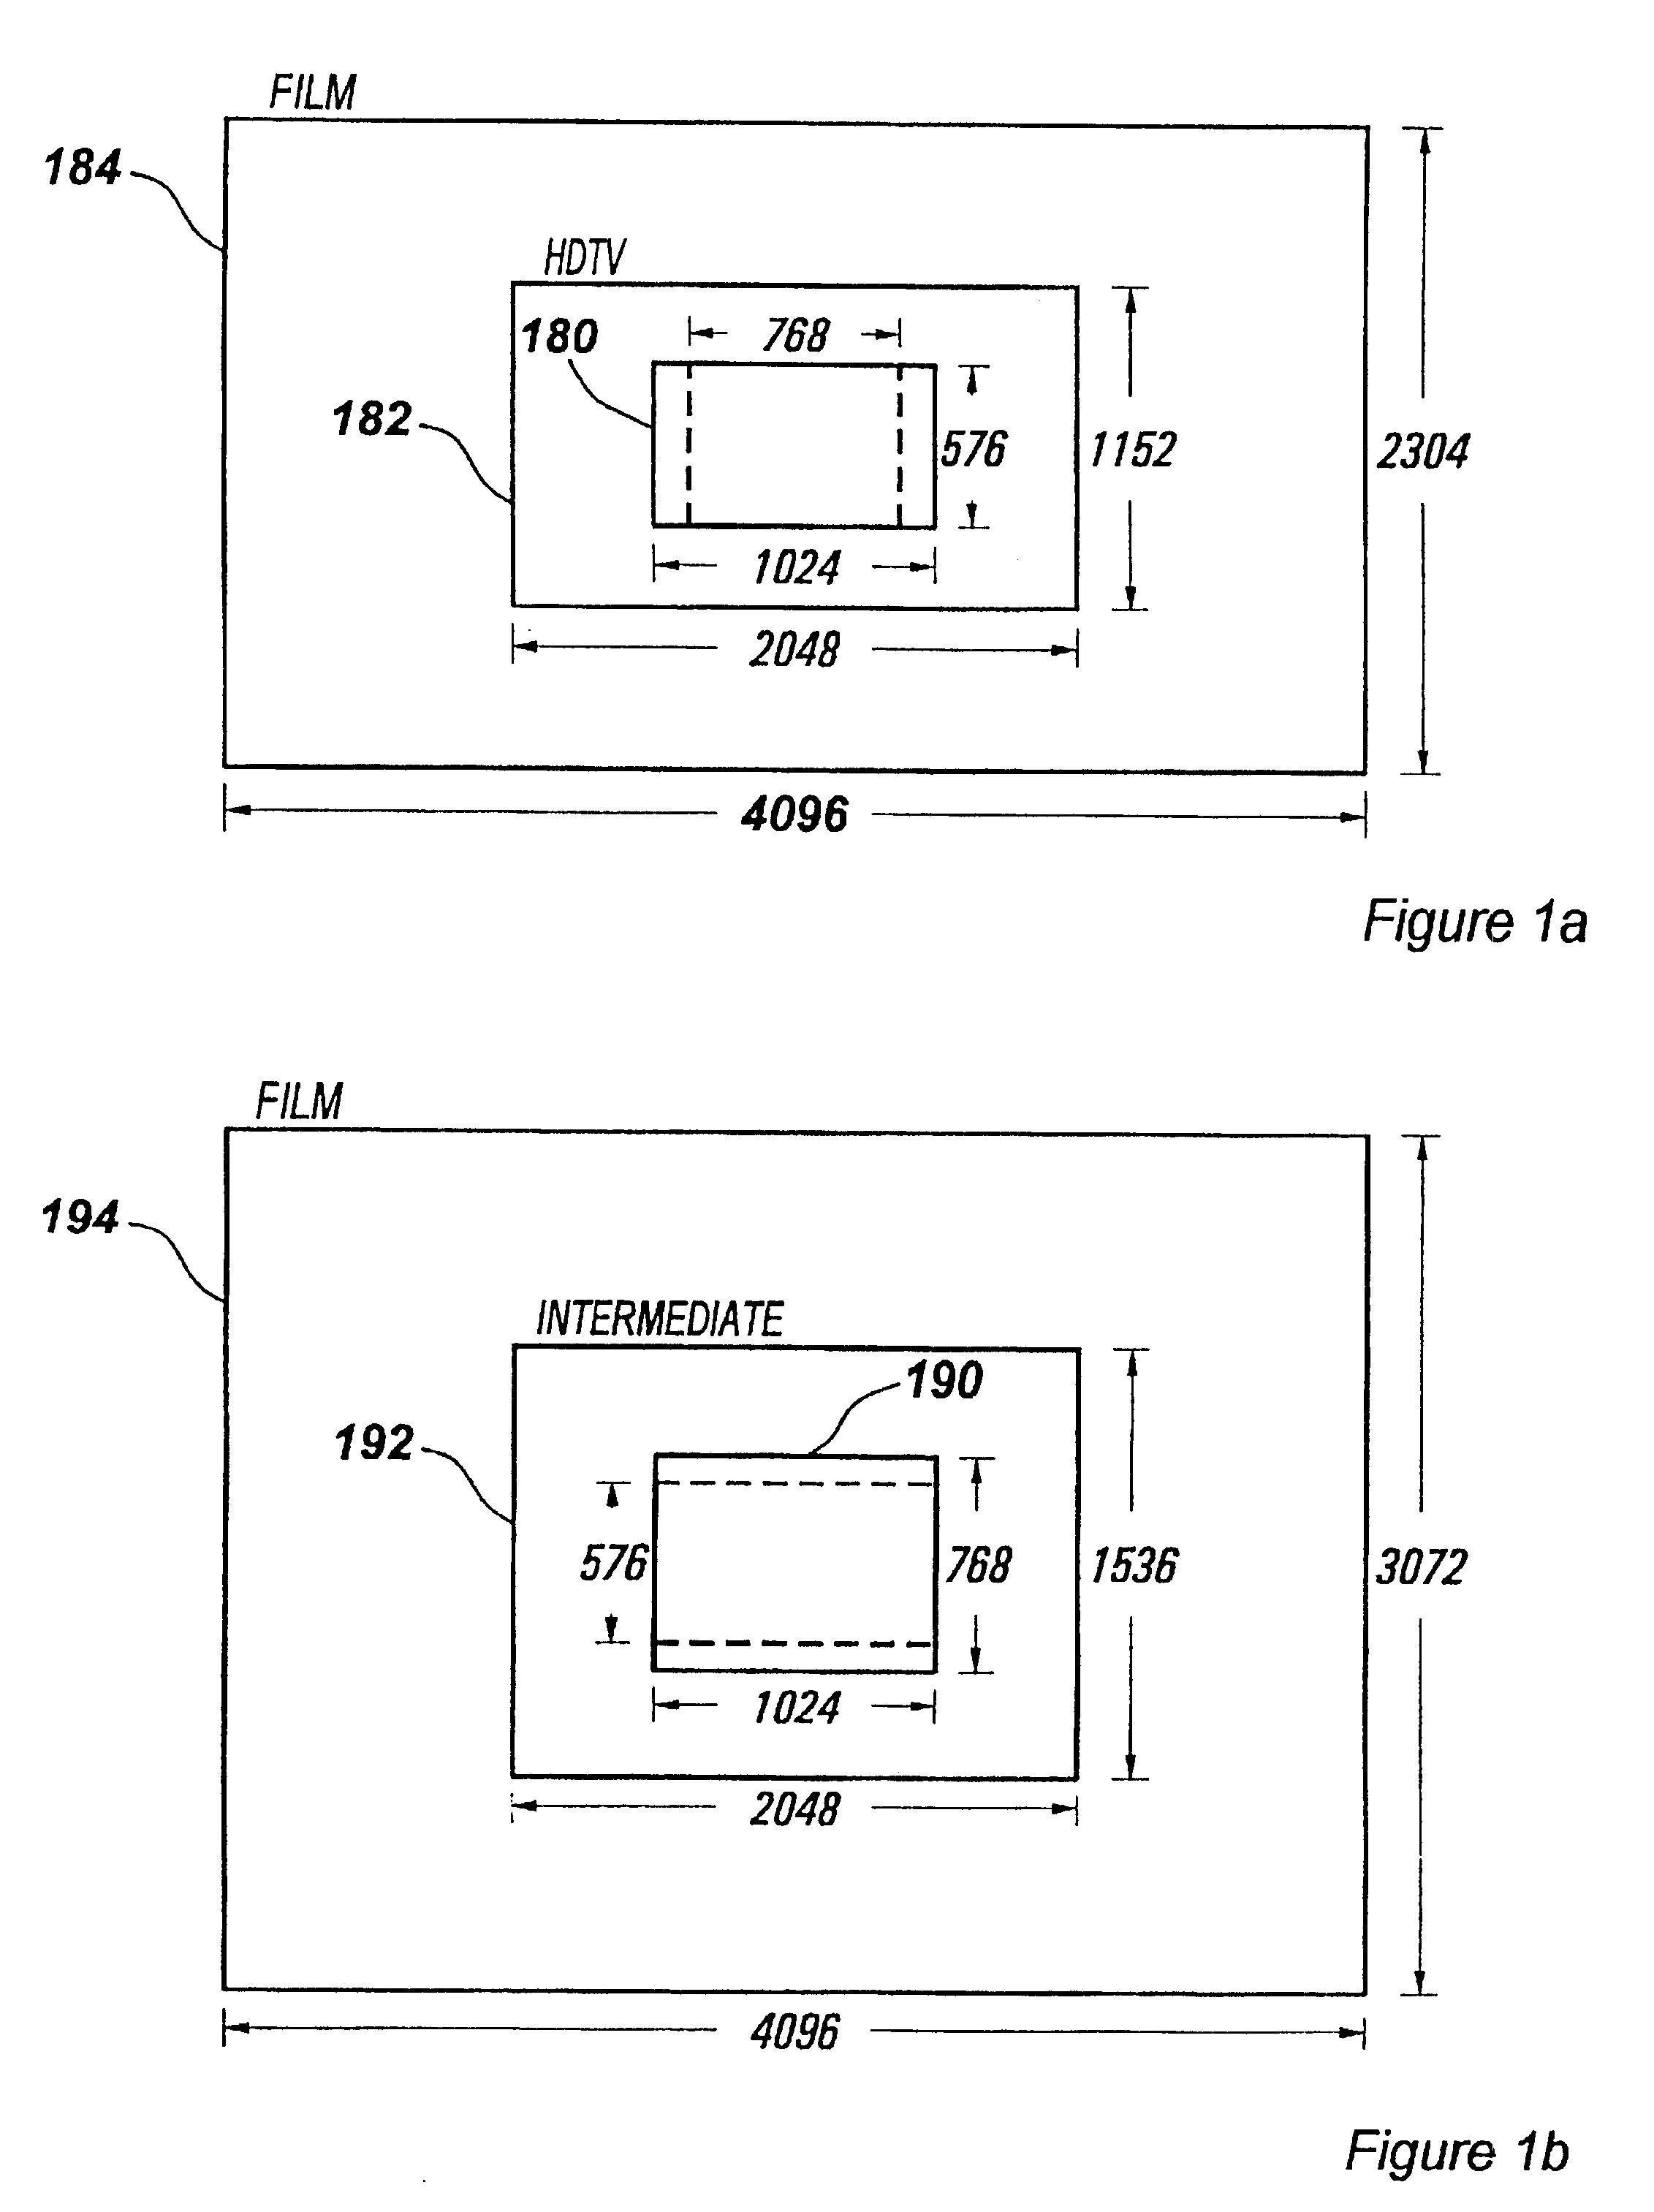 Multi-format audio/video production system